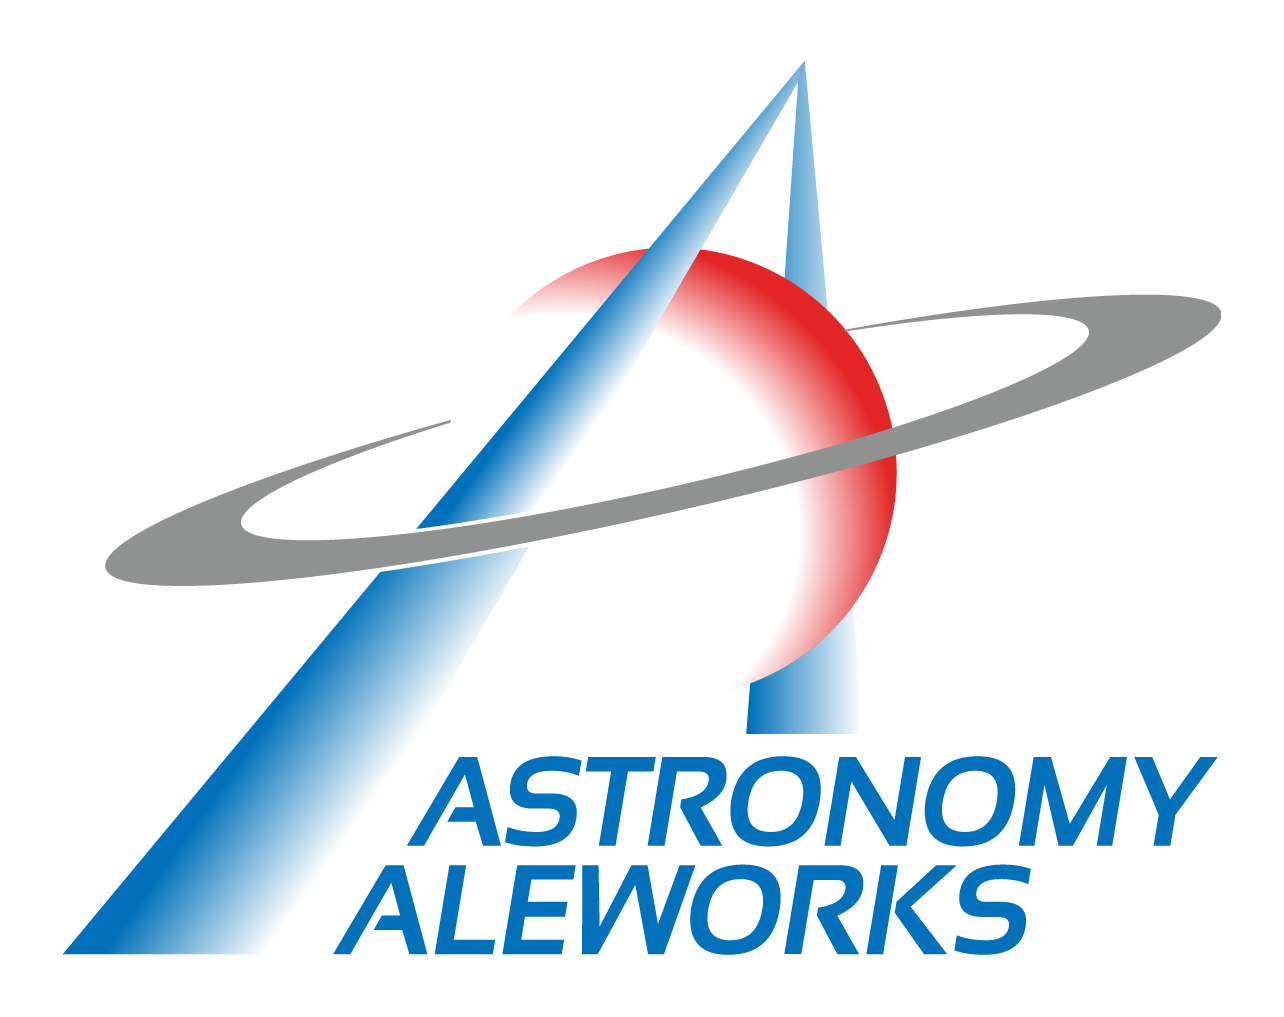 Astronomy Ale Works